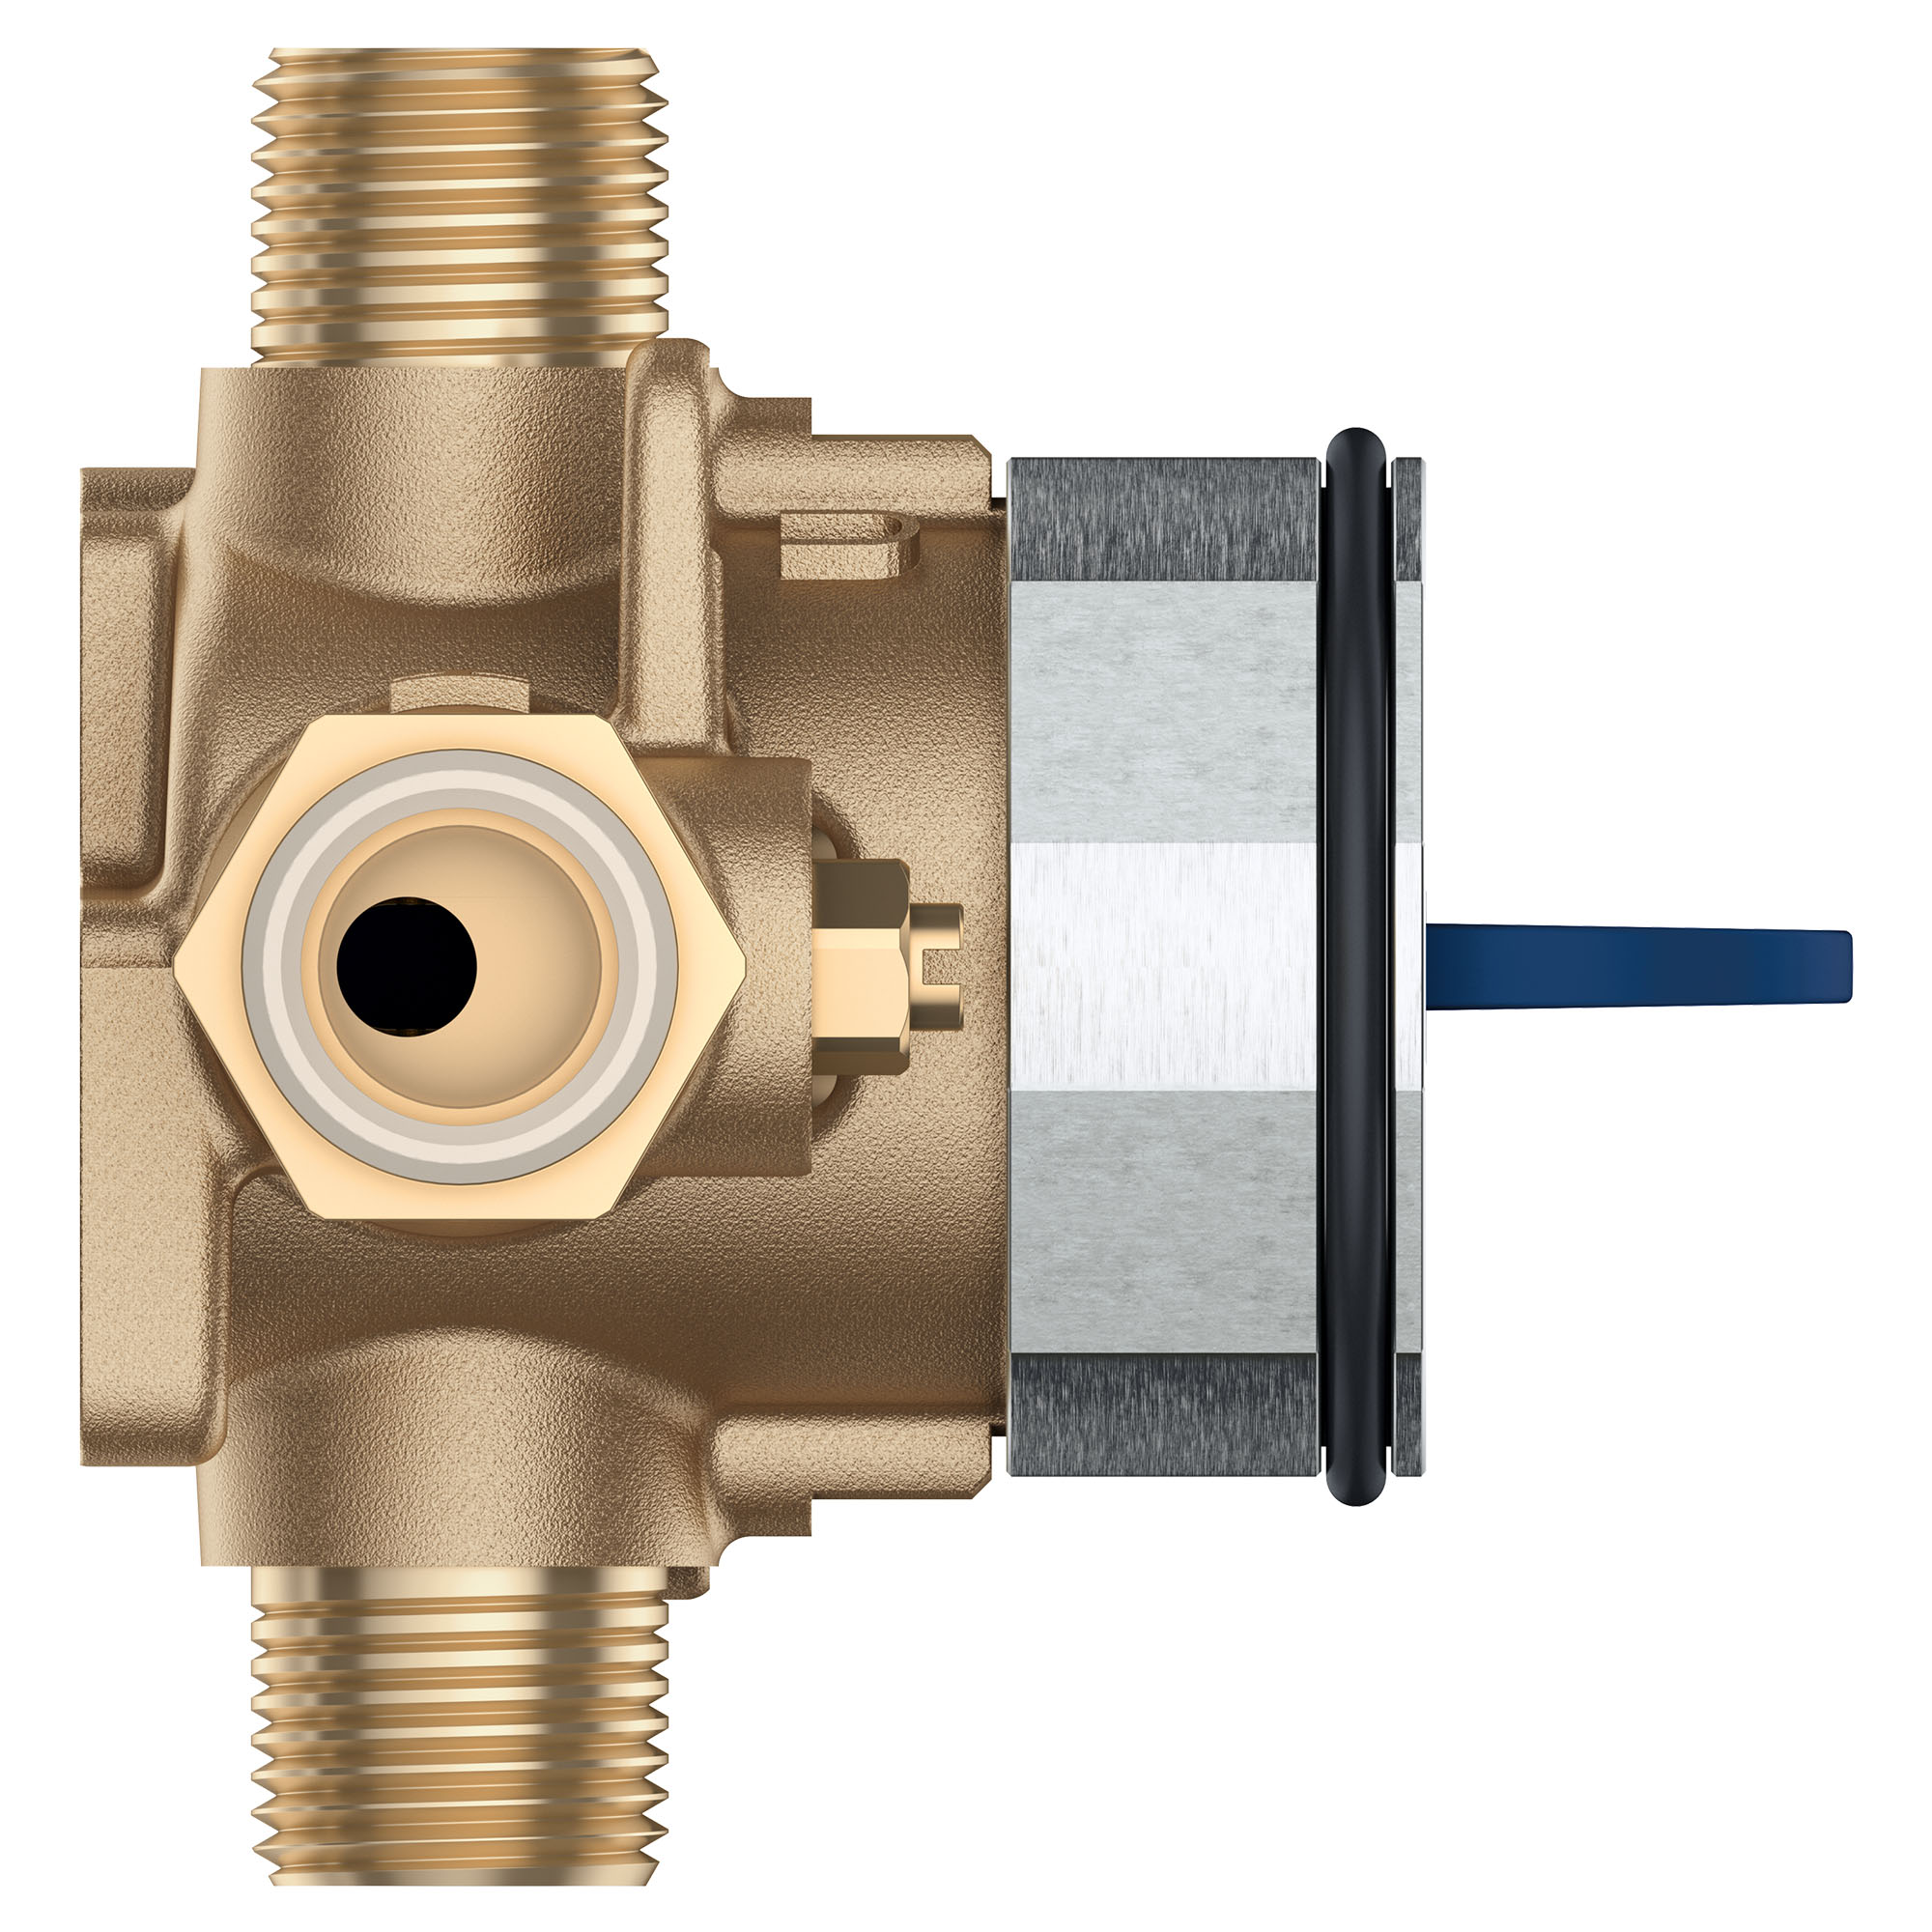 GrohSafe™ 3.0 Pressure Balance Valve Rough with CPVC Outlets